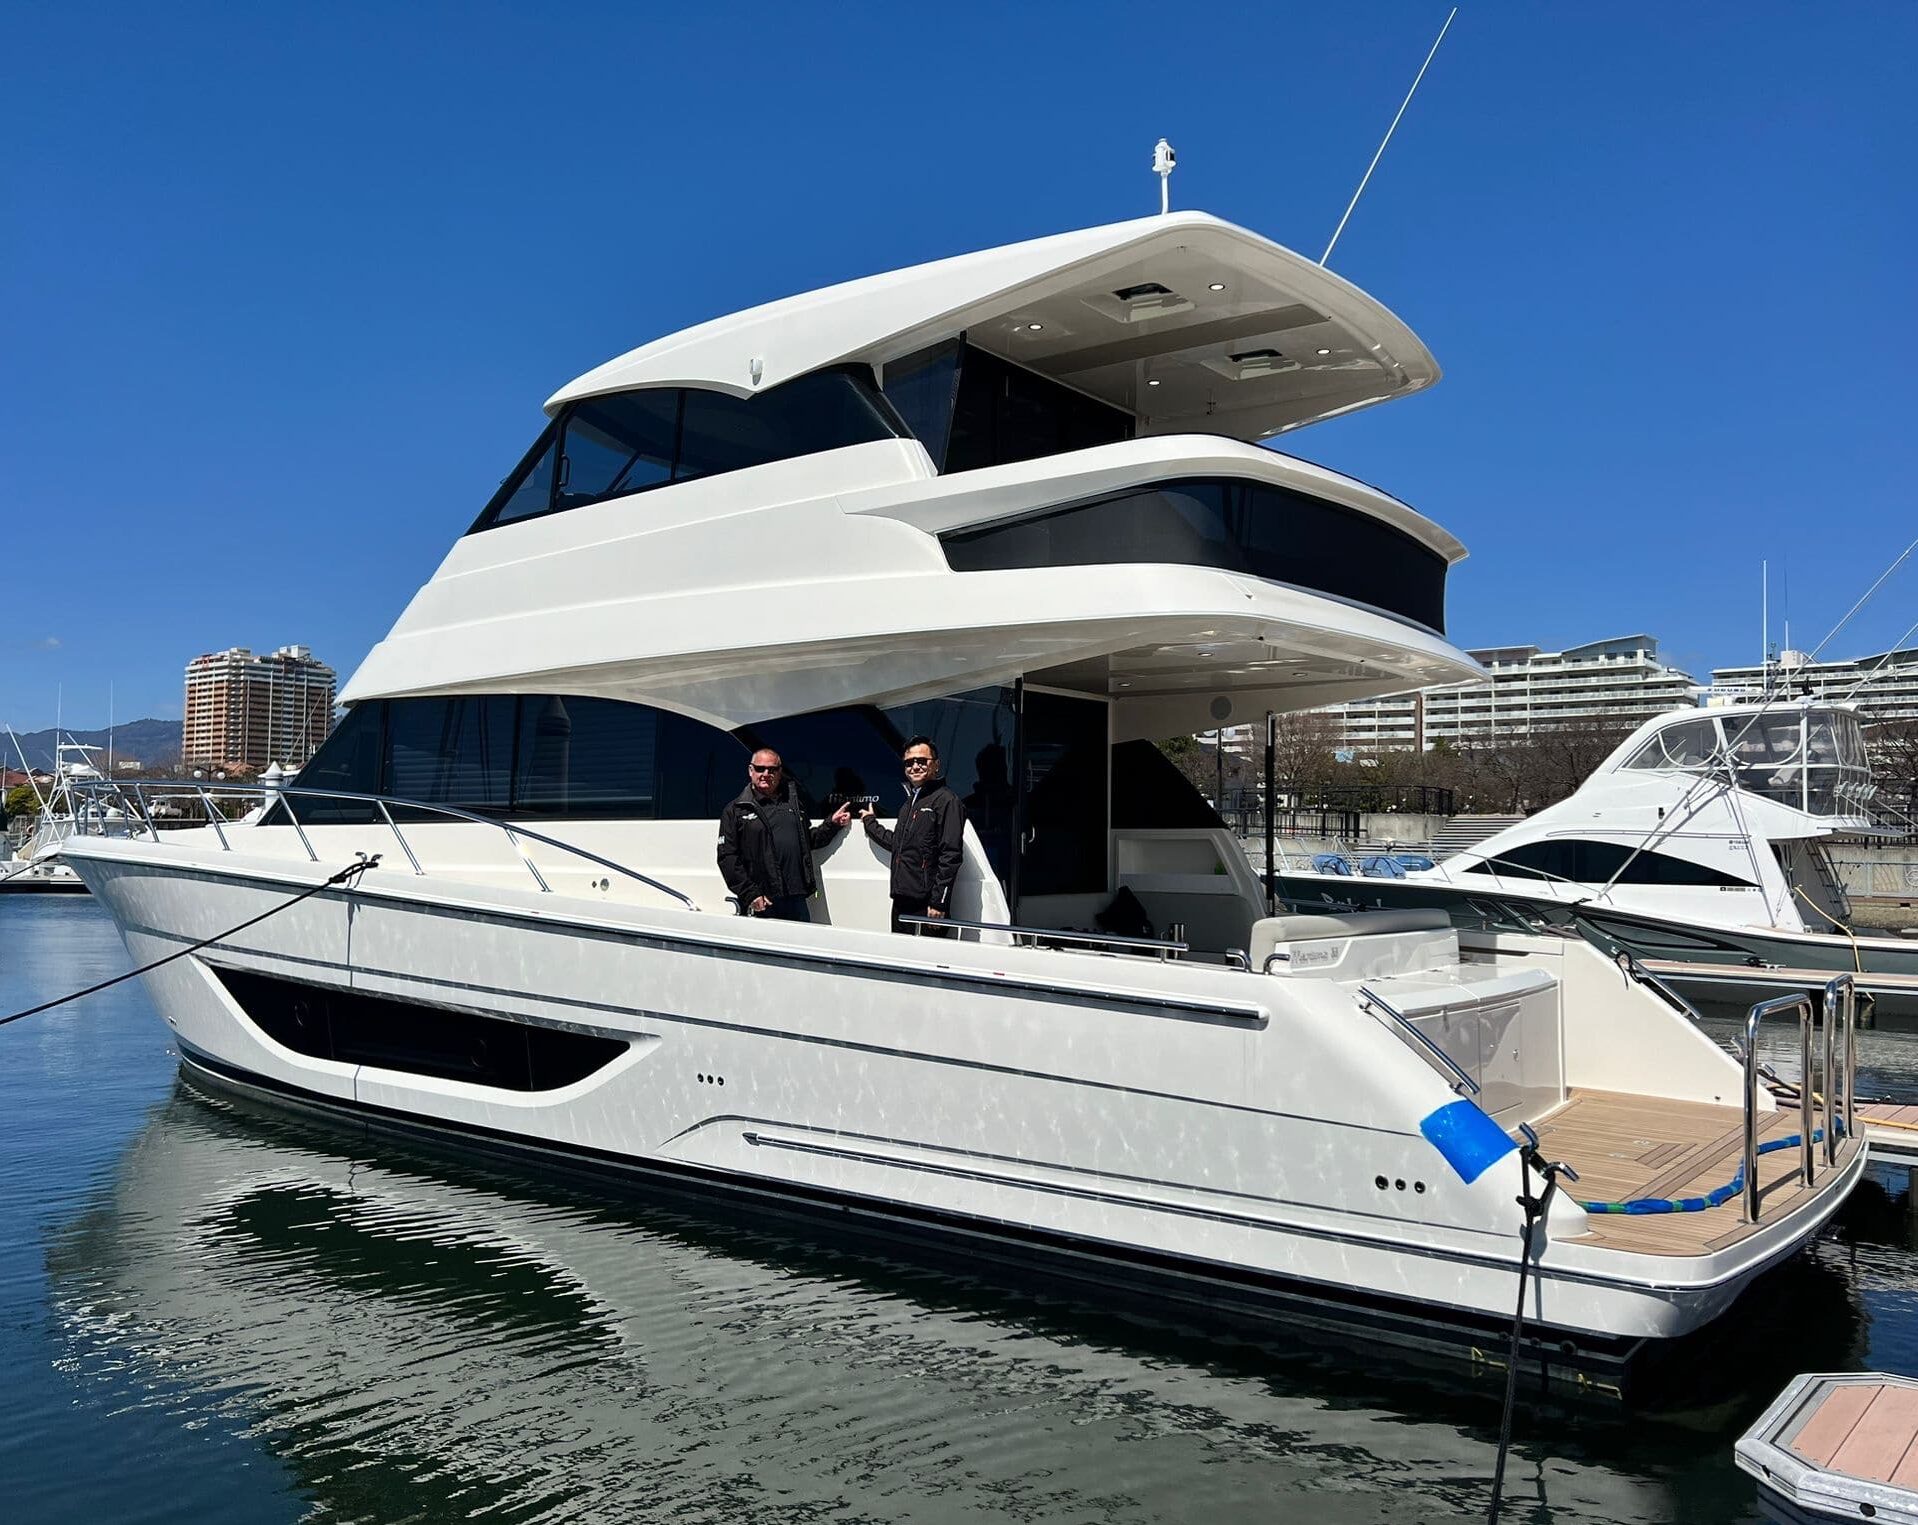 Maritimo’s dealer in Japan, Eins A Resort, takes delivery of a new M55